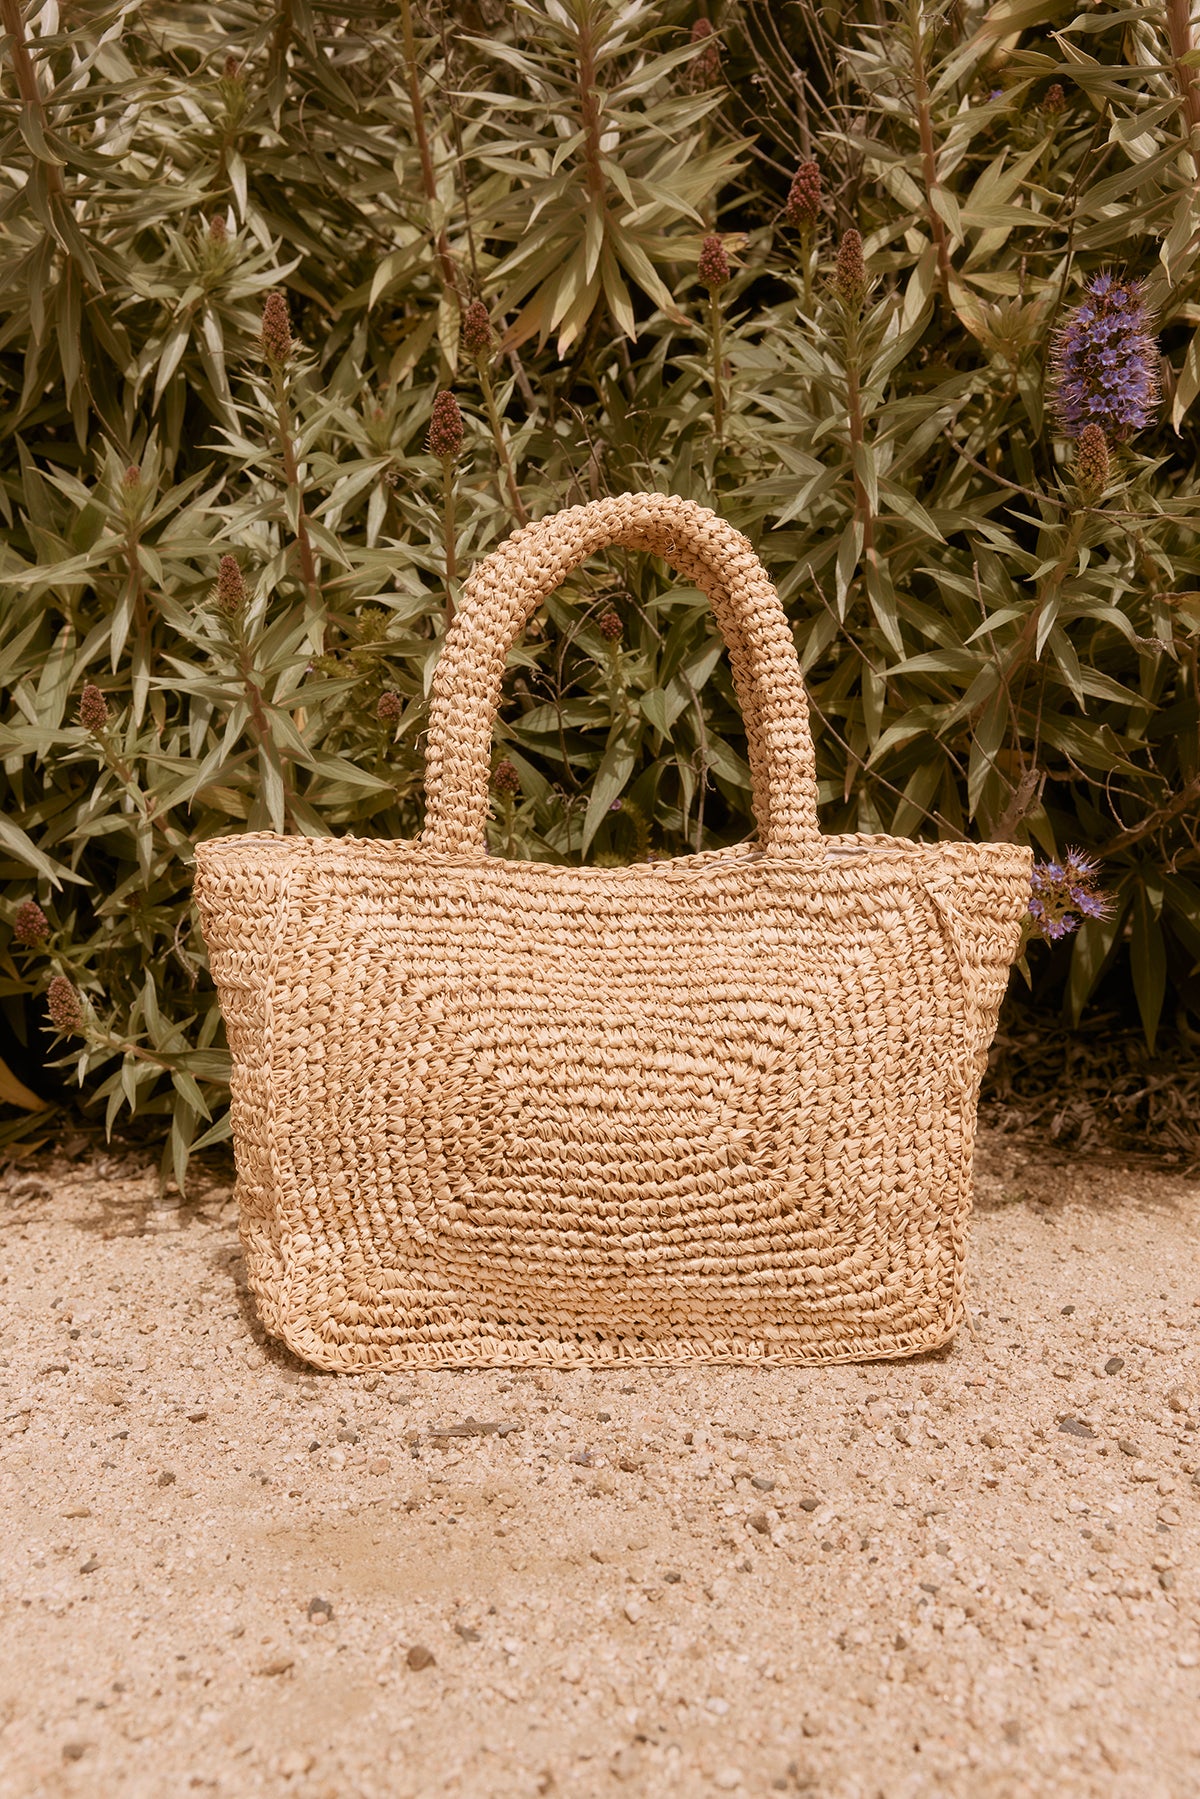 Woven raffia TINA STRAW TOTE BAG by Velvet by Graham & Spencer sits on sandy ground against a backdrop of leafy and flowering plants.-37000781693121